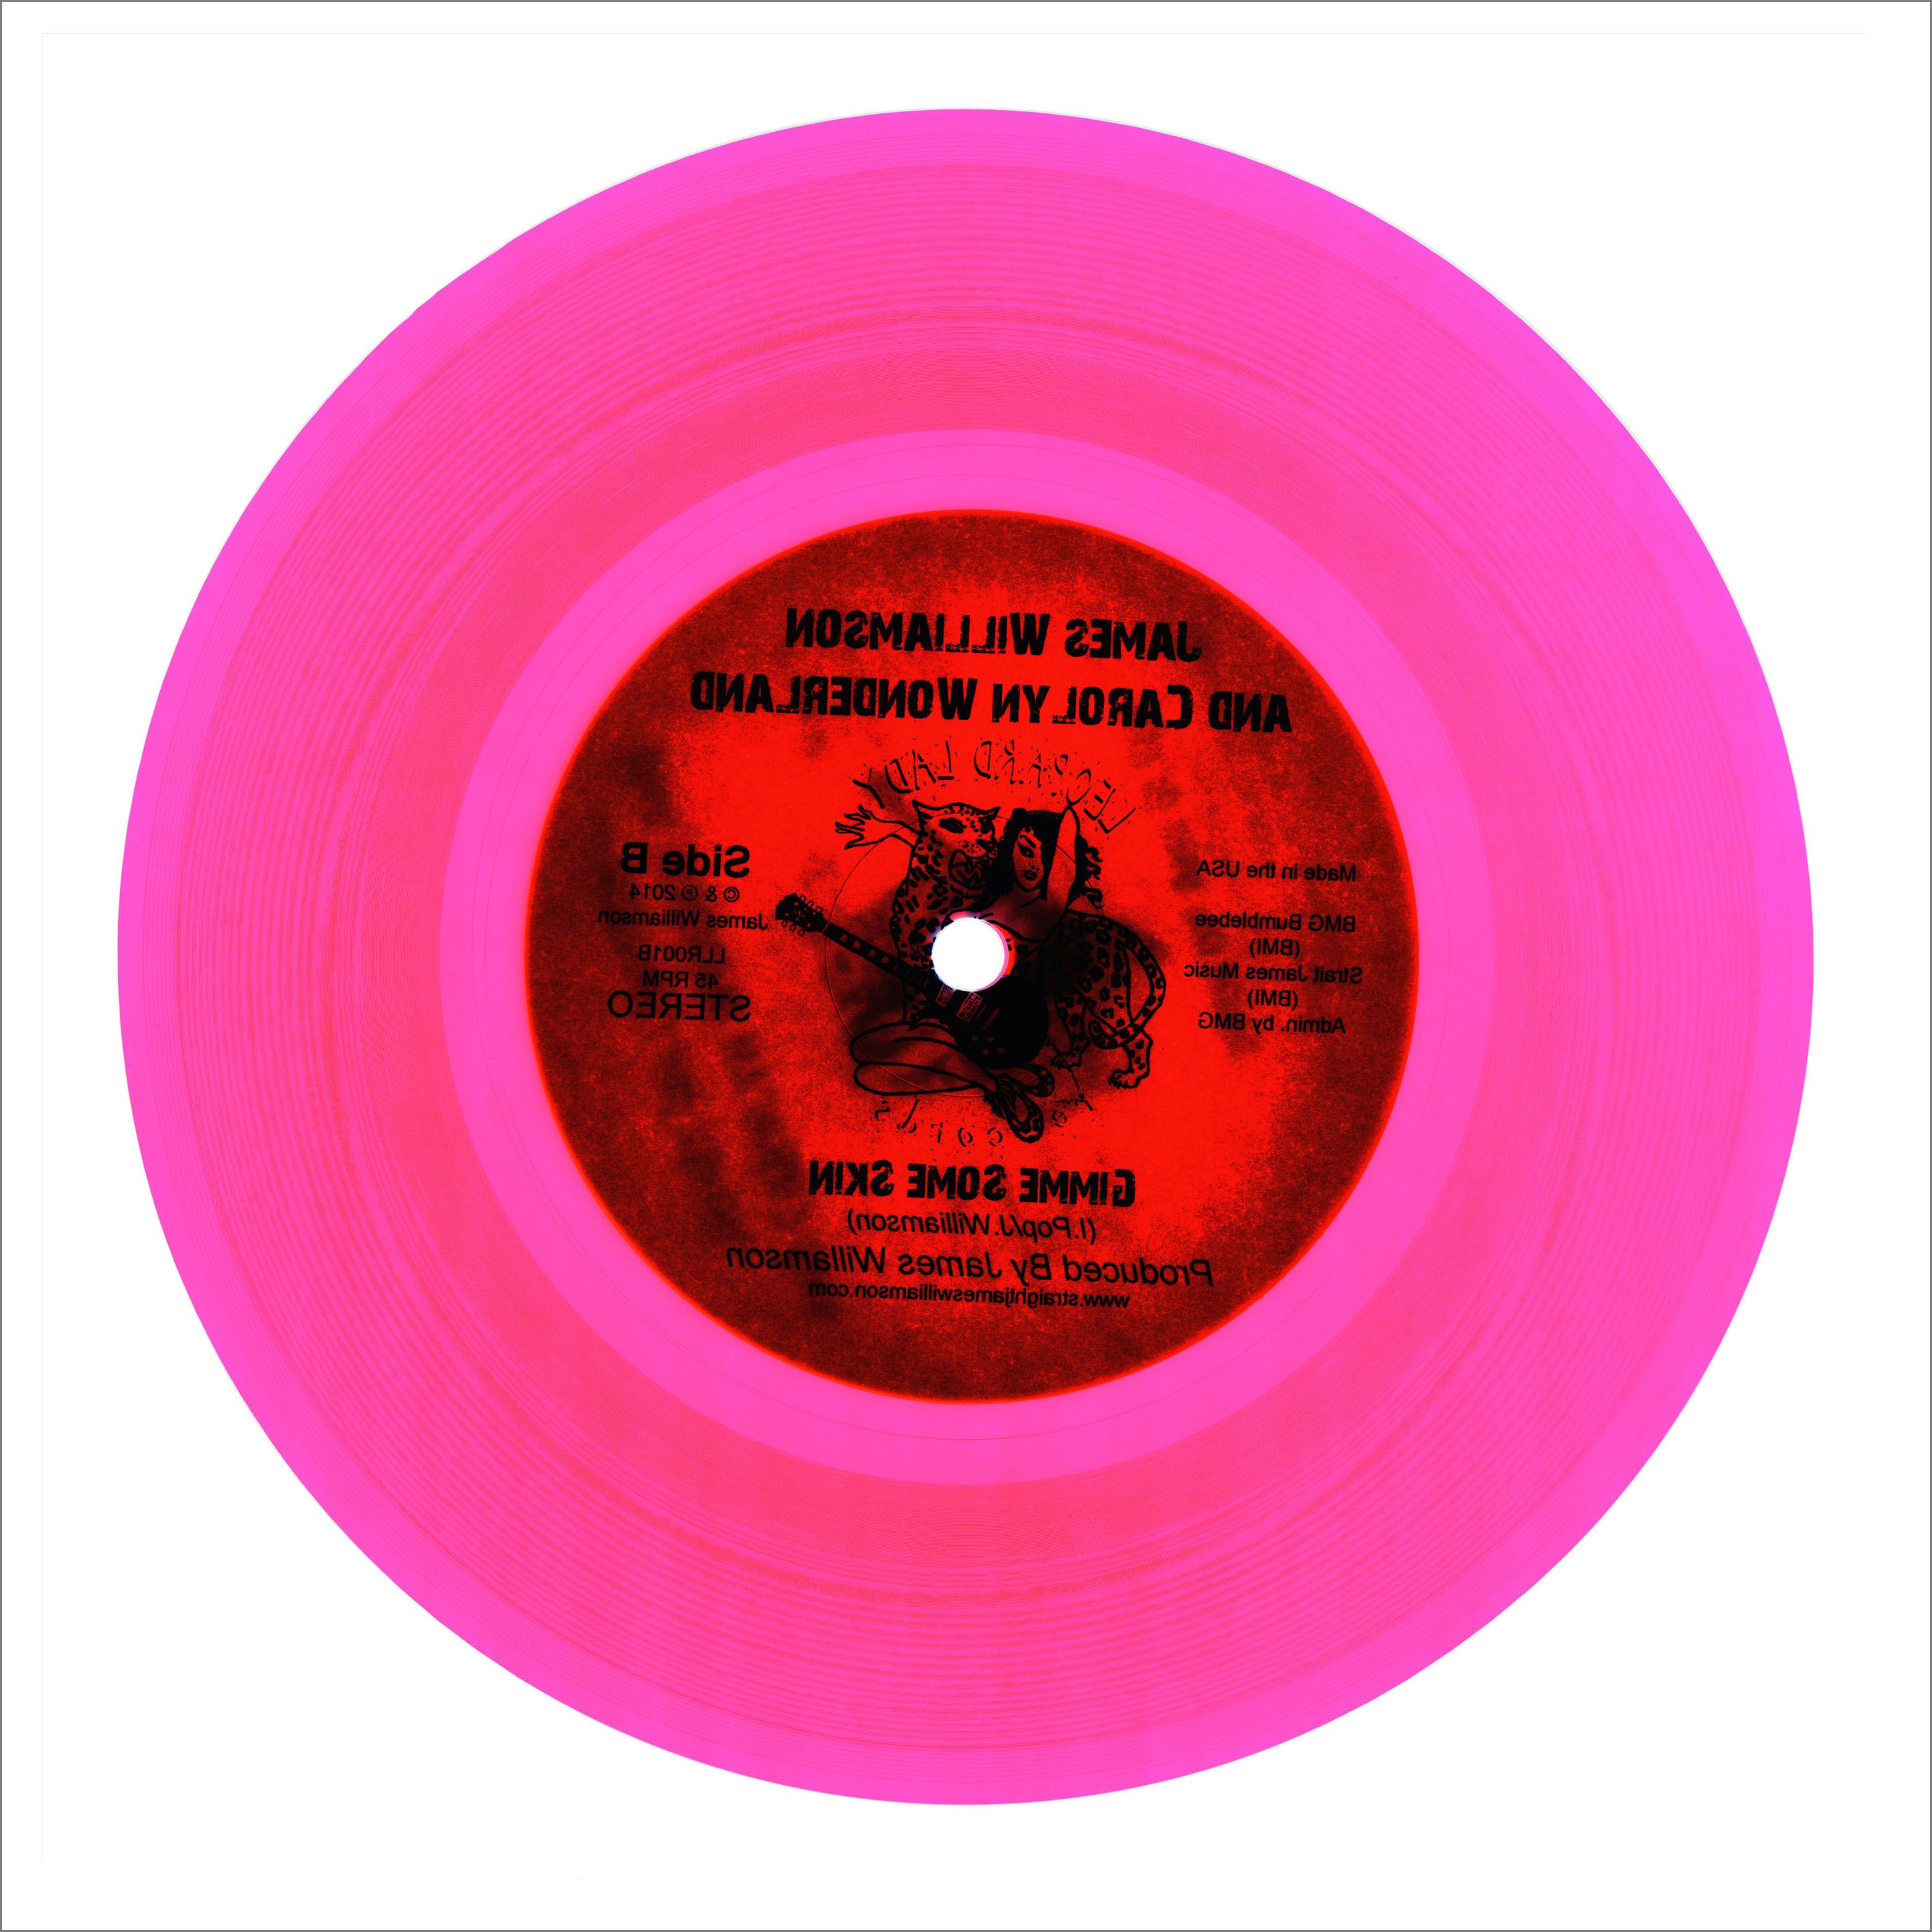 Heidler & Heeps Color Photograph - B Side Vinyl Collection, Made in the USA (Pink) - Pop Art Color Photogrpahy